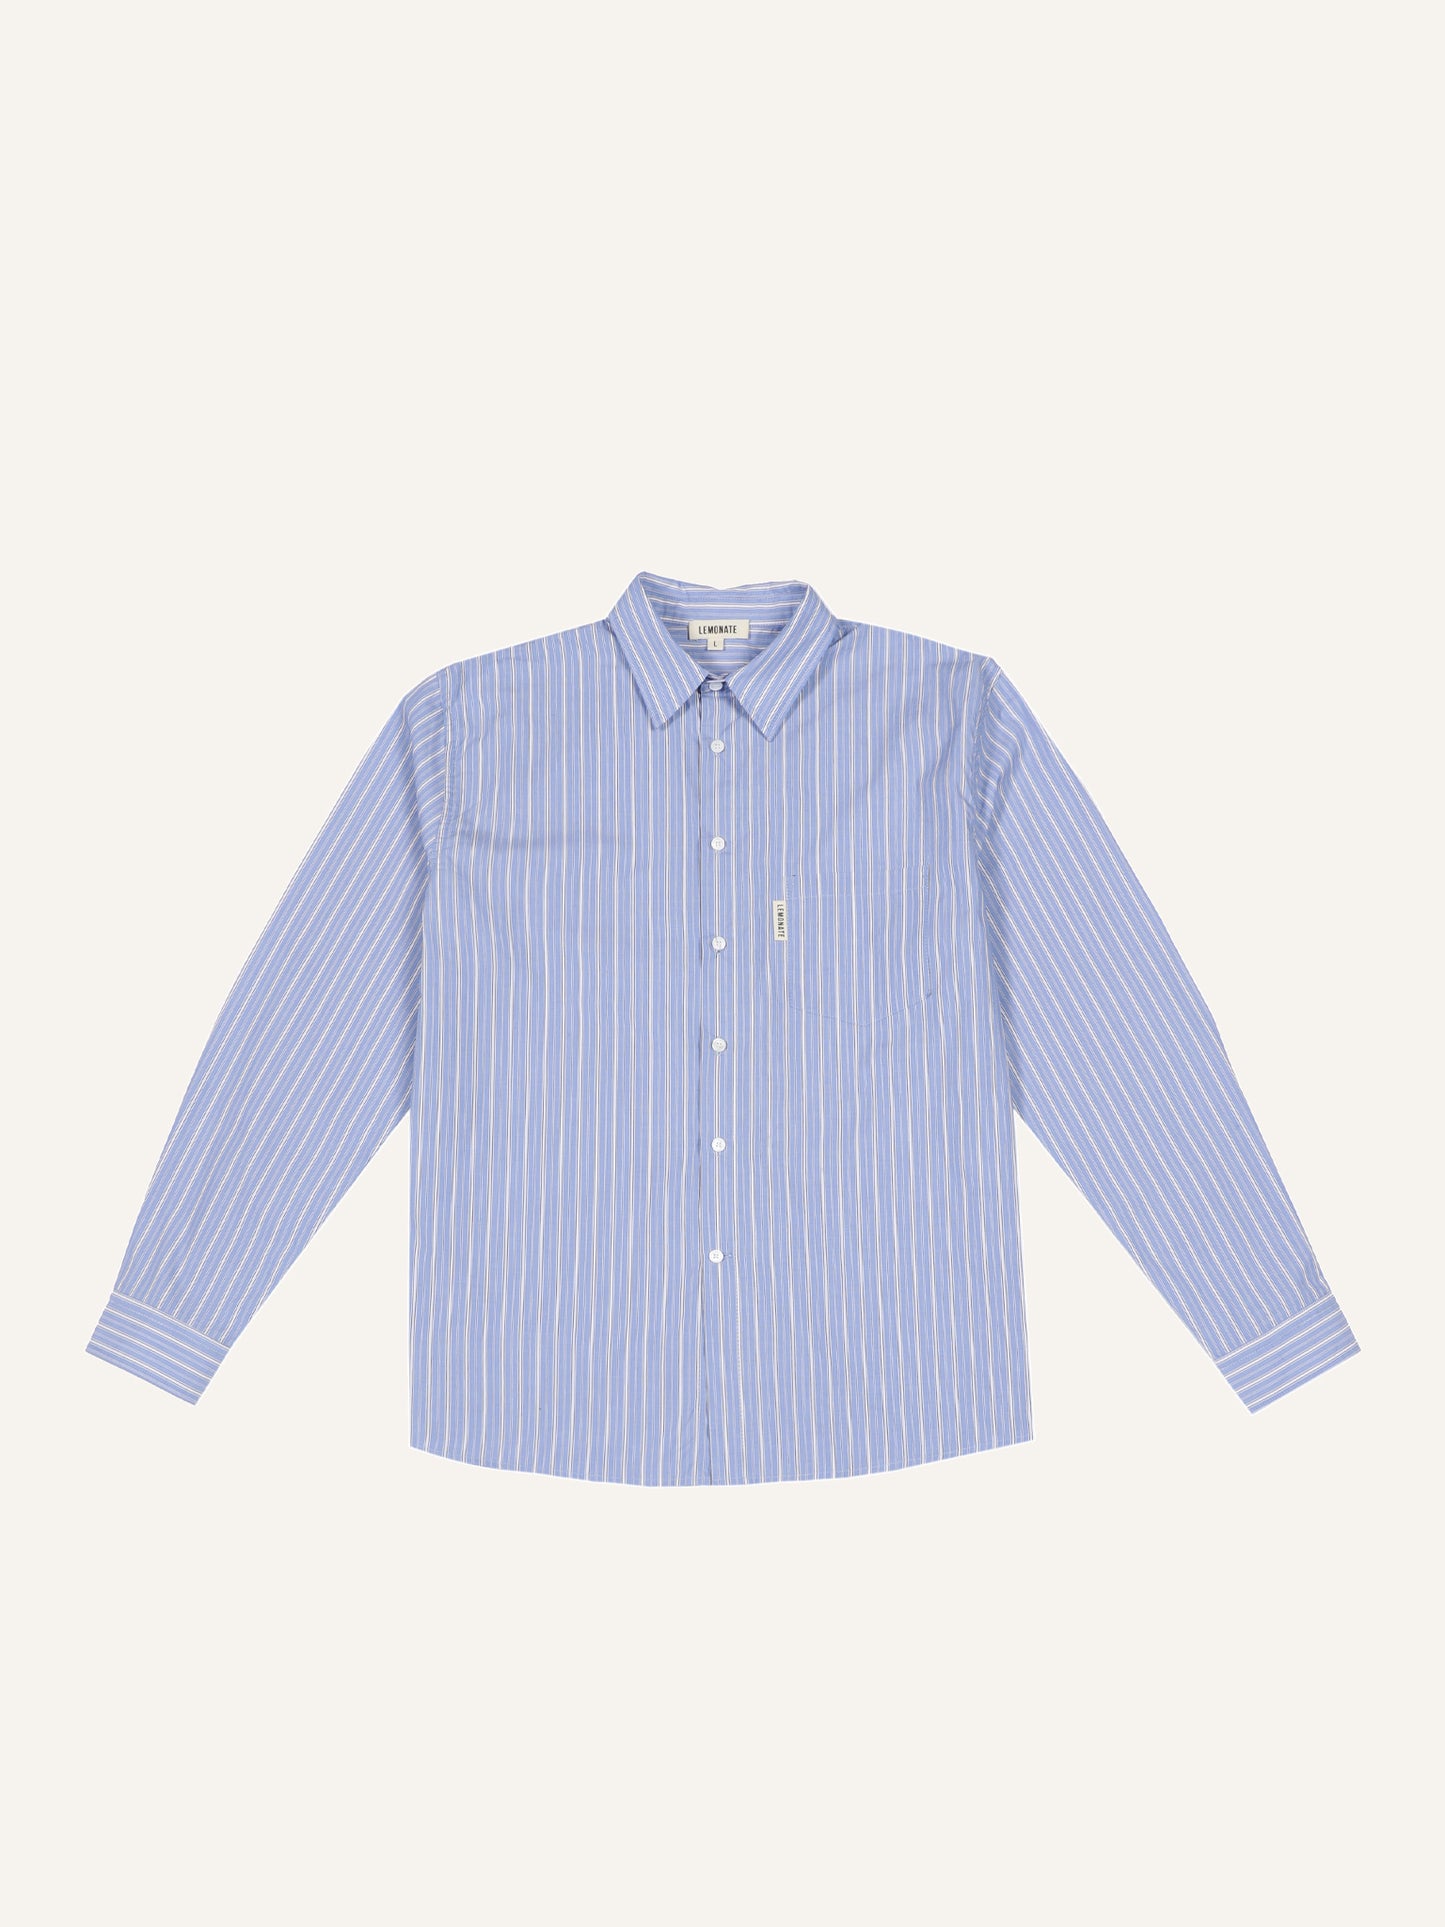 STRIPED SHIRT WITH PATCH POCKET BLUE